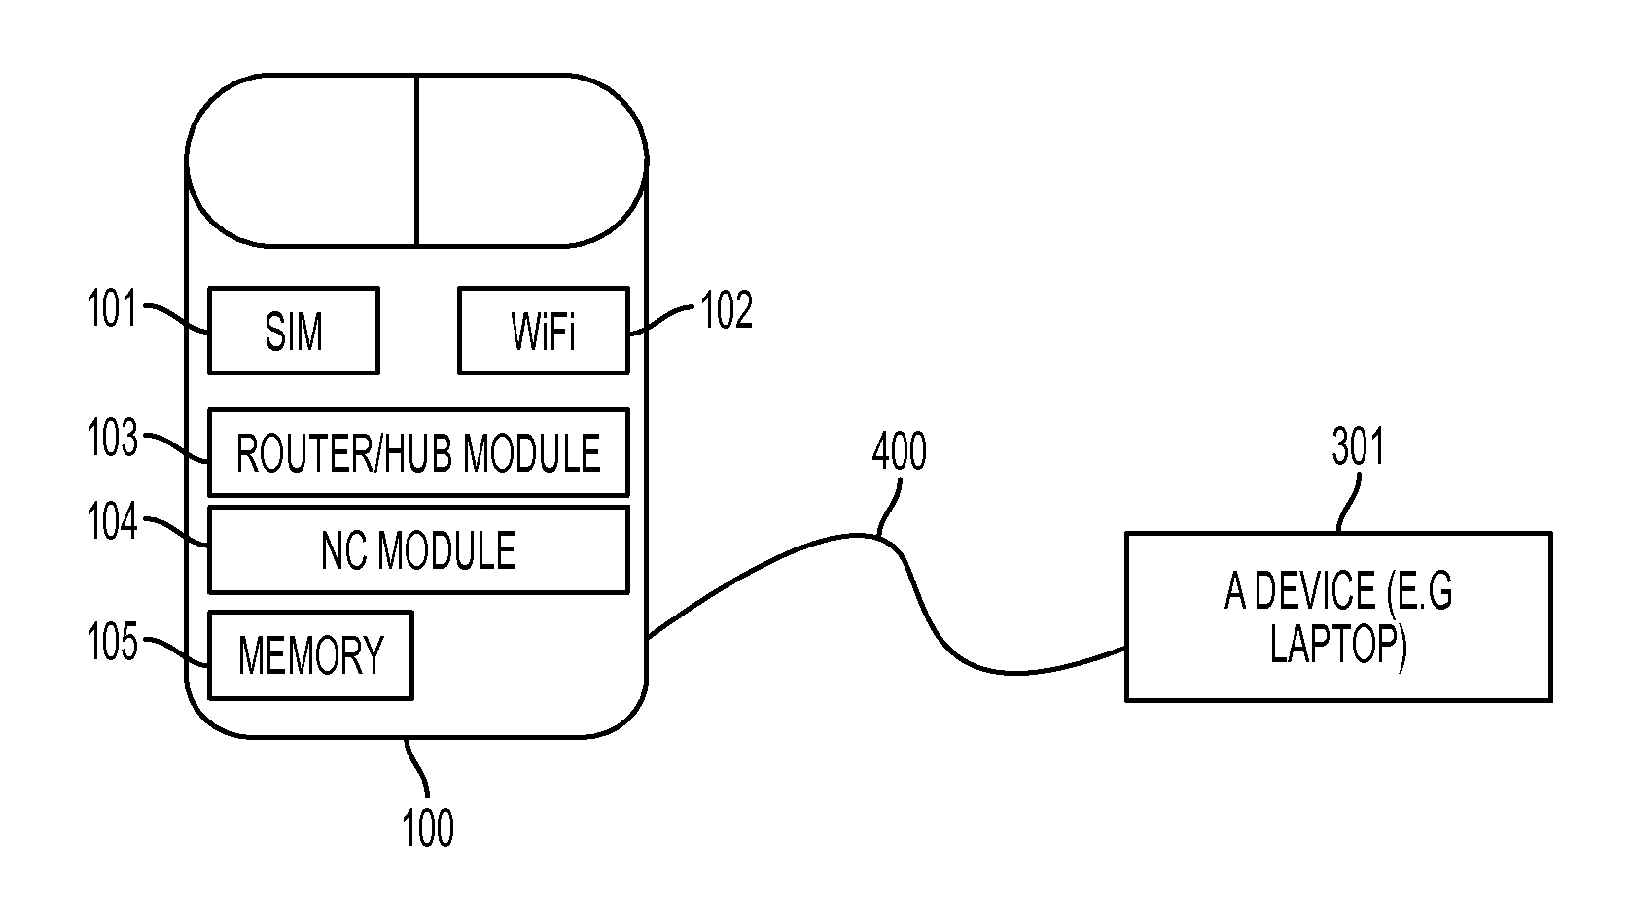 Pointing device router for smooth collaboration between devices